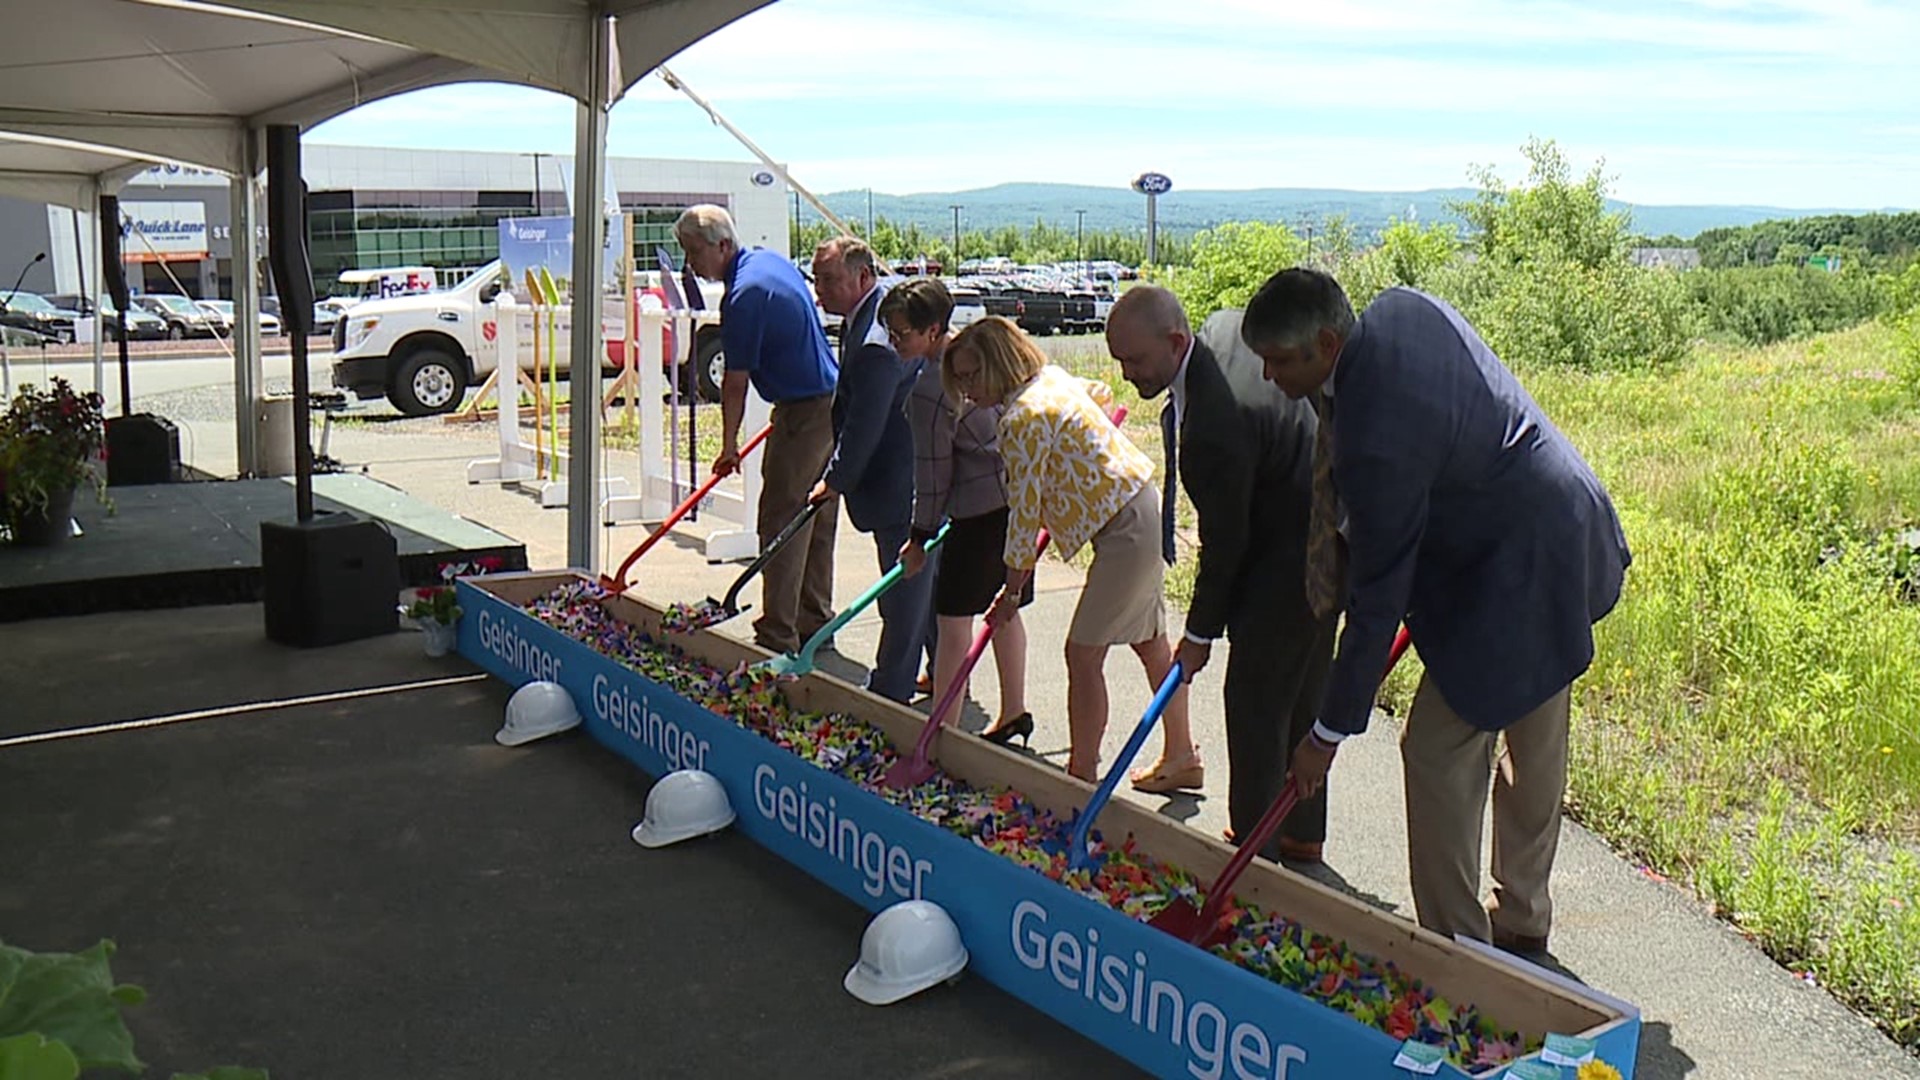 Geisinger is breaking ground on its brand new cancer center in Dickson City that officials say will make treatment more accessible to cancer patients in our area.